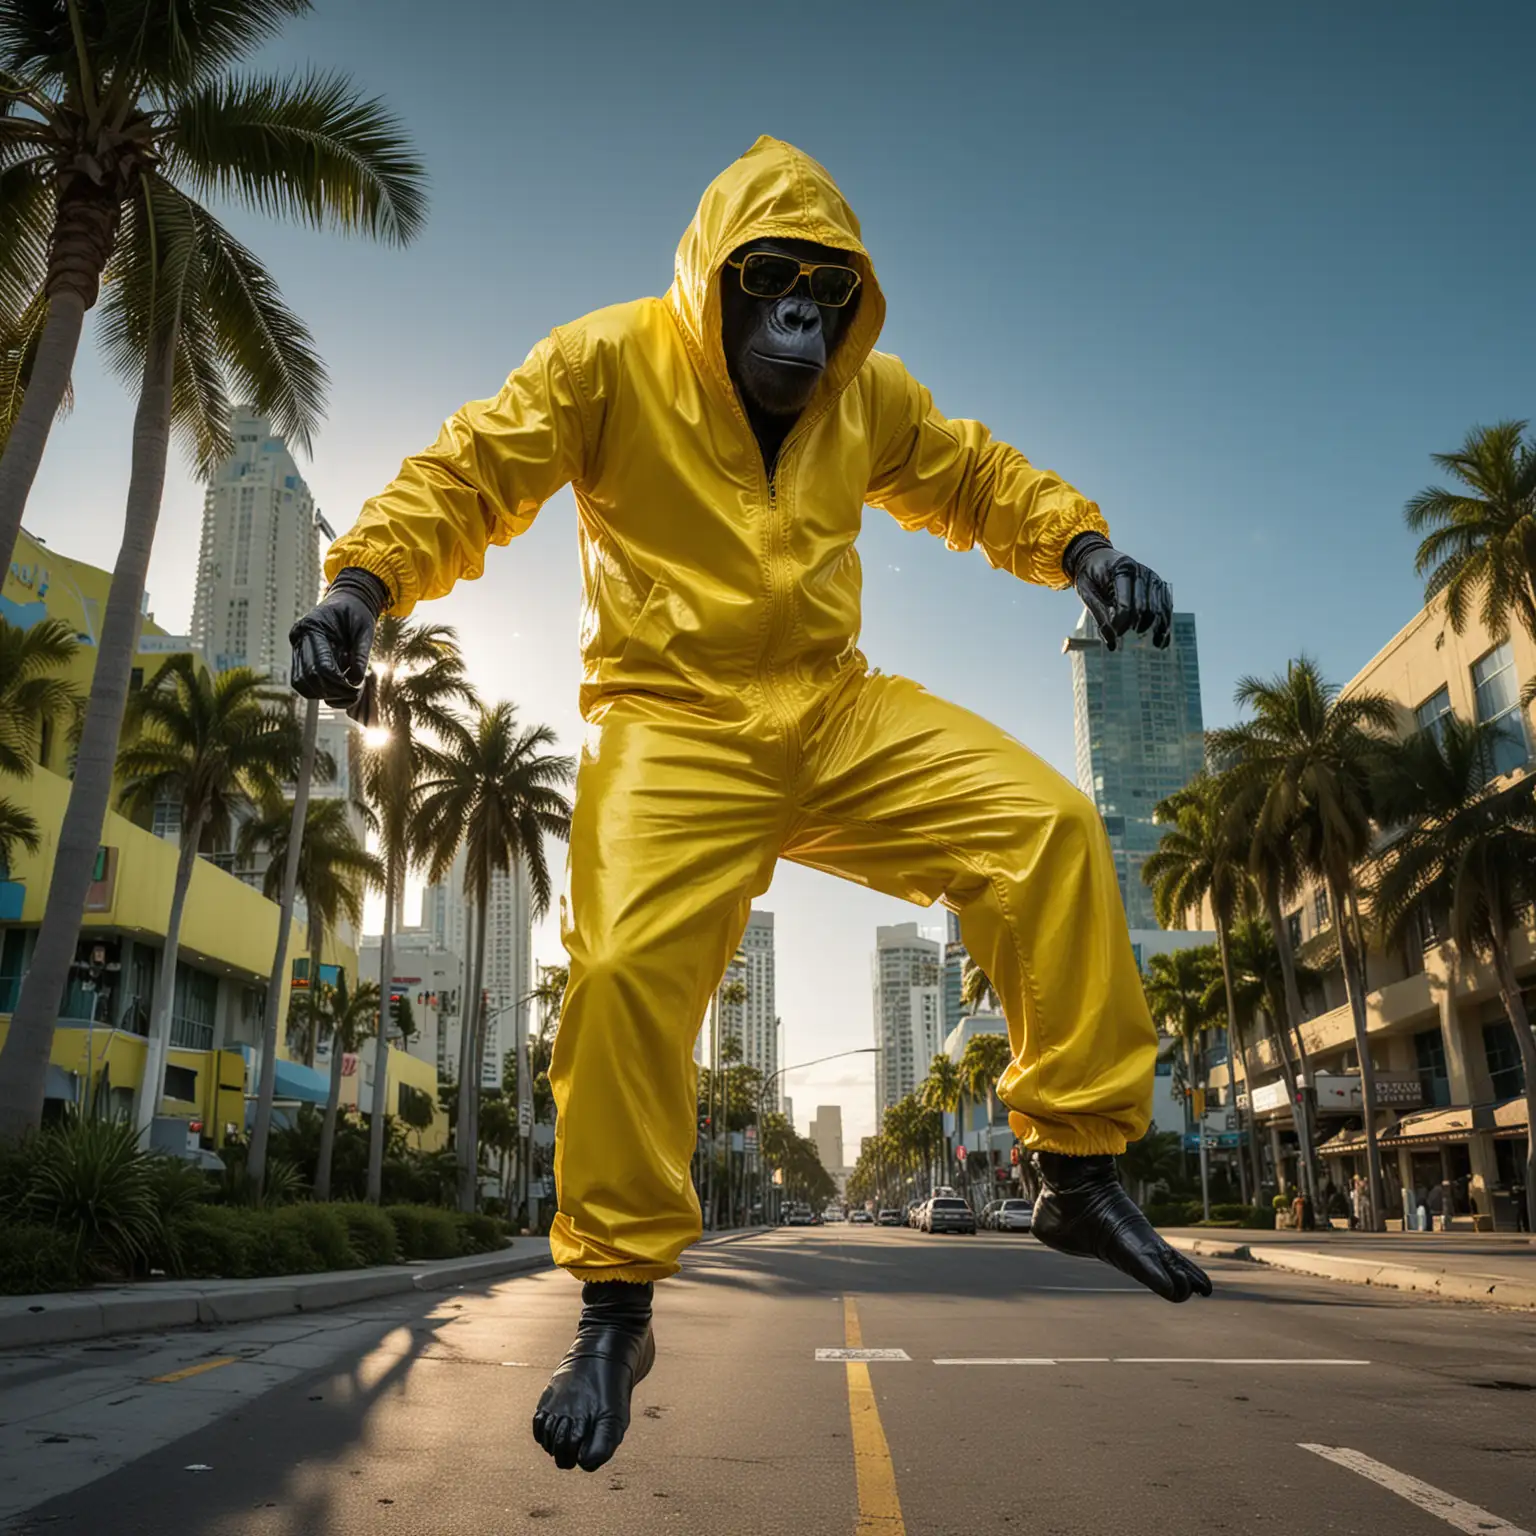 The gorilla is in Miami, it's sunset, and there's art deco architecture with green and YELLOW neon lights illuminating the area. The gorilla wears dark sunglasses (the sun reflects on his sunglasses) and a yellow jumpsuit like the one in the Breaking Bad series. His head is covered by the yellow hood. His hands are covered with light blue latex gloves. .He is jumping and his body is suspended on the air.pov camera view. movement.